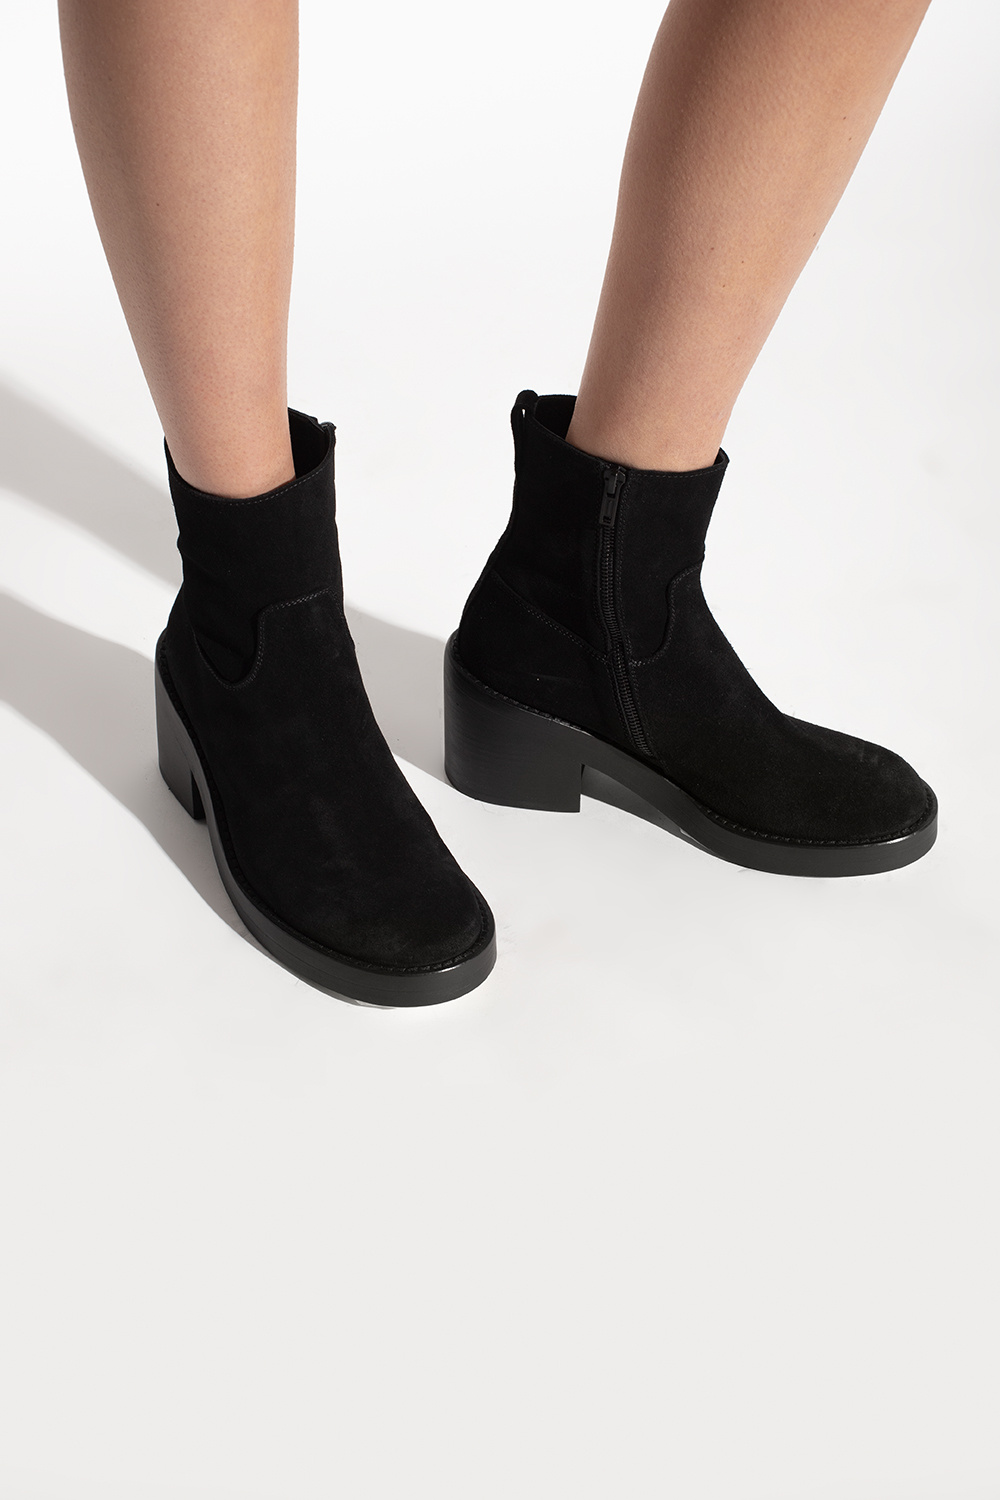 Ann Demeulemeester ‘Noor’ suede ankle boots | Women's Shoes | Vitkac